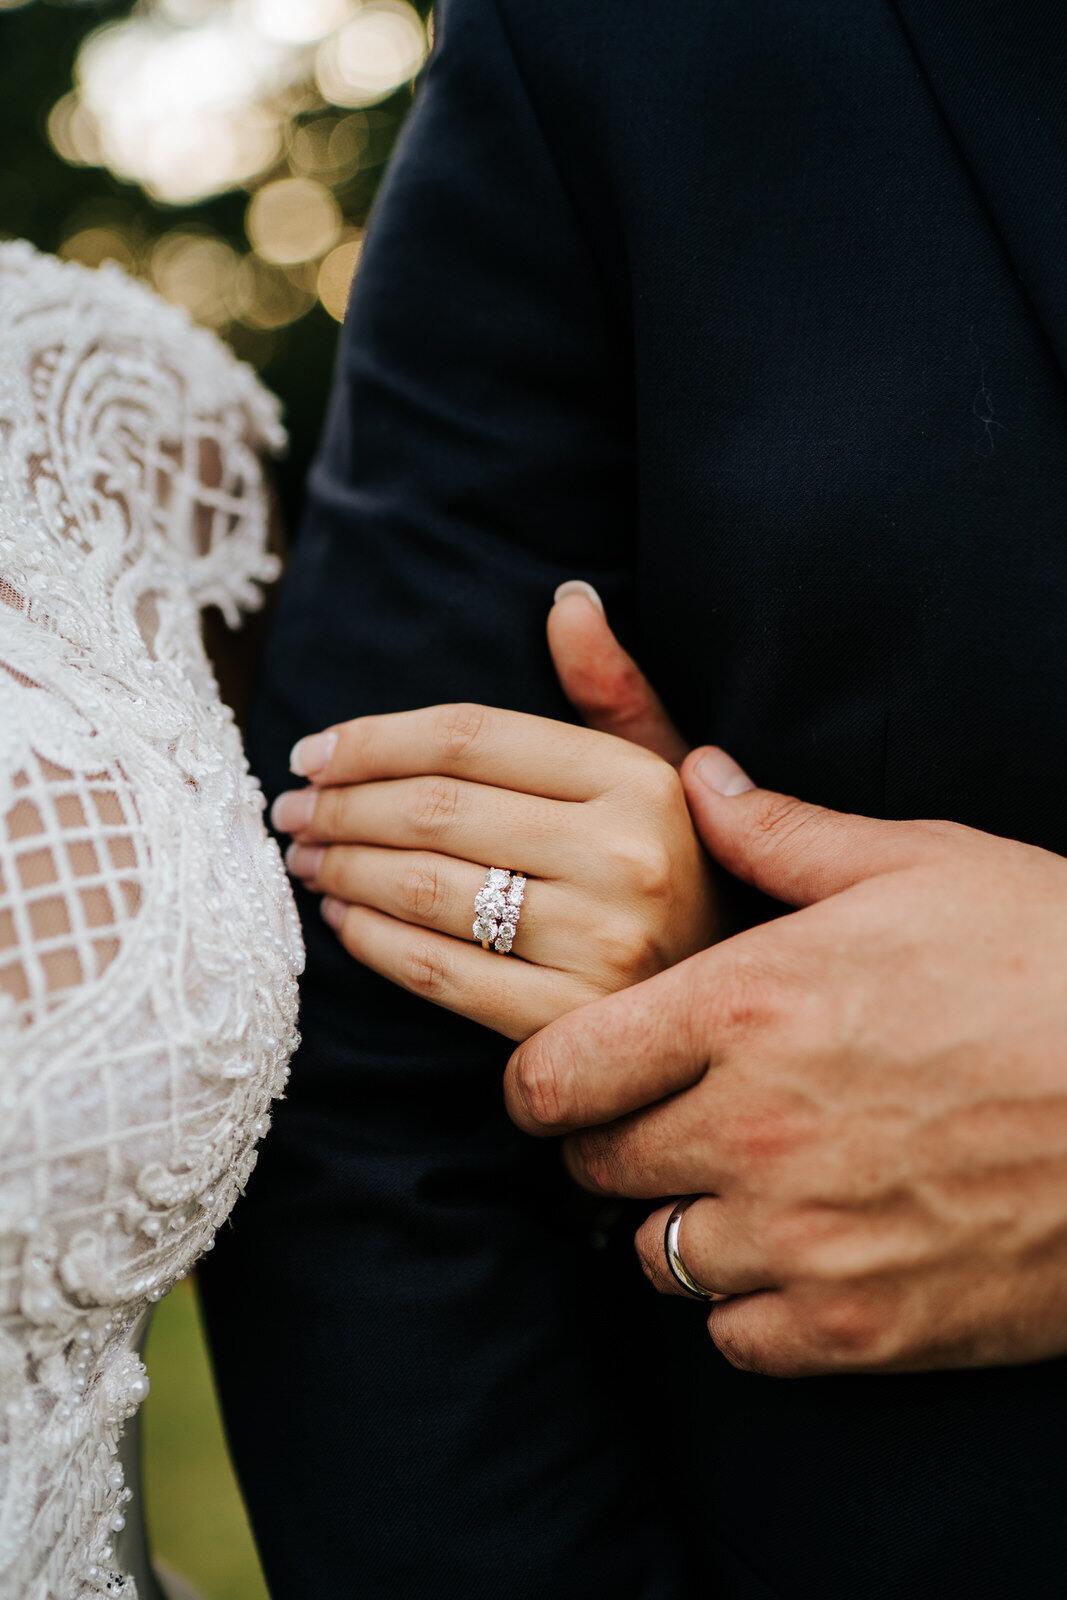 Close-up photograph of the bride and groom's hands with additional focus on the diamond ring